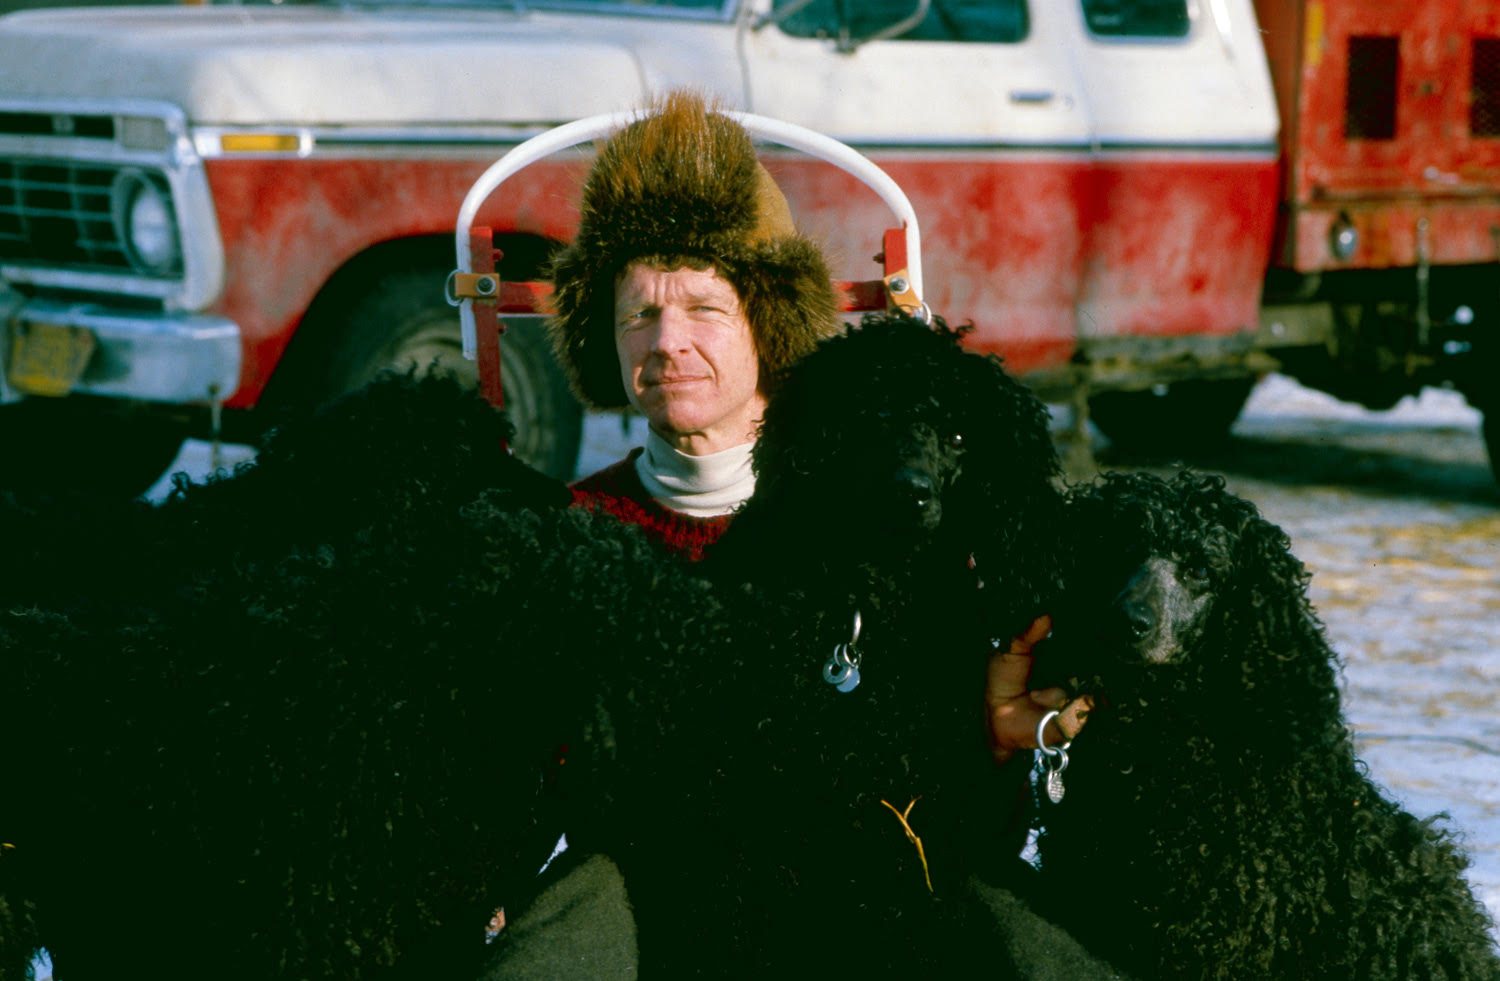 A man in a fur hat poses with shaggy black poodles